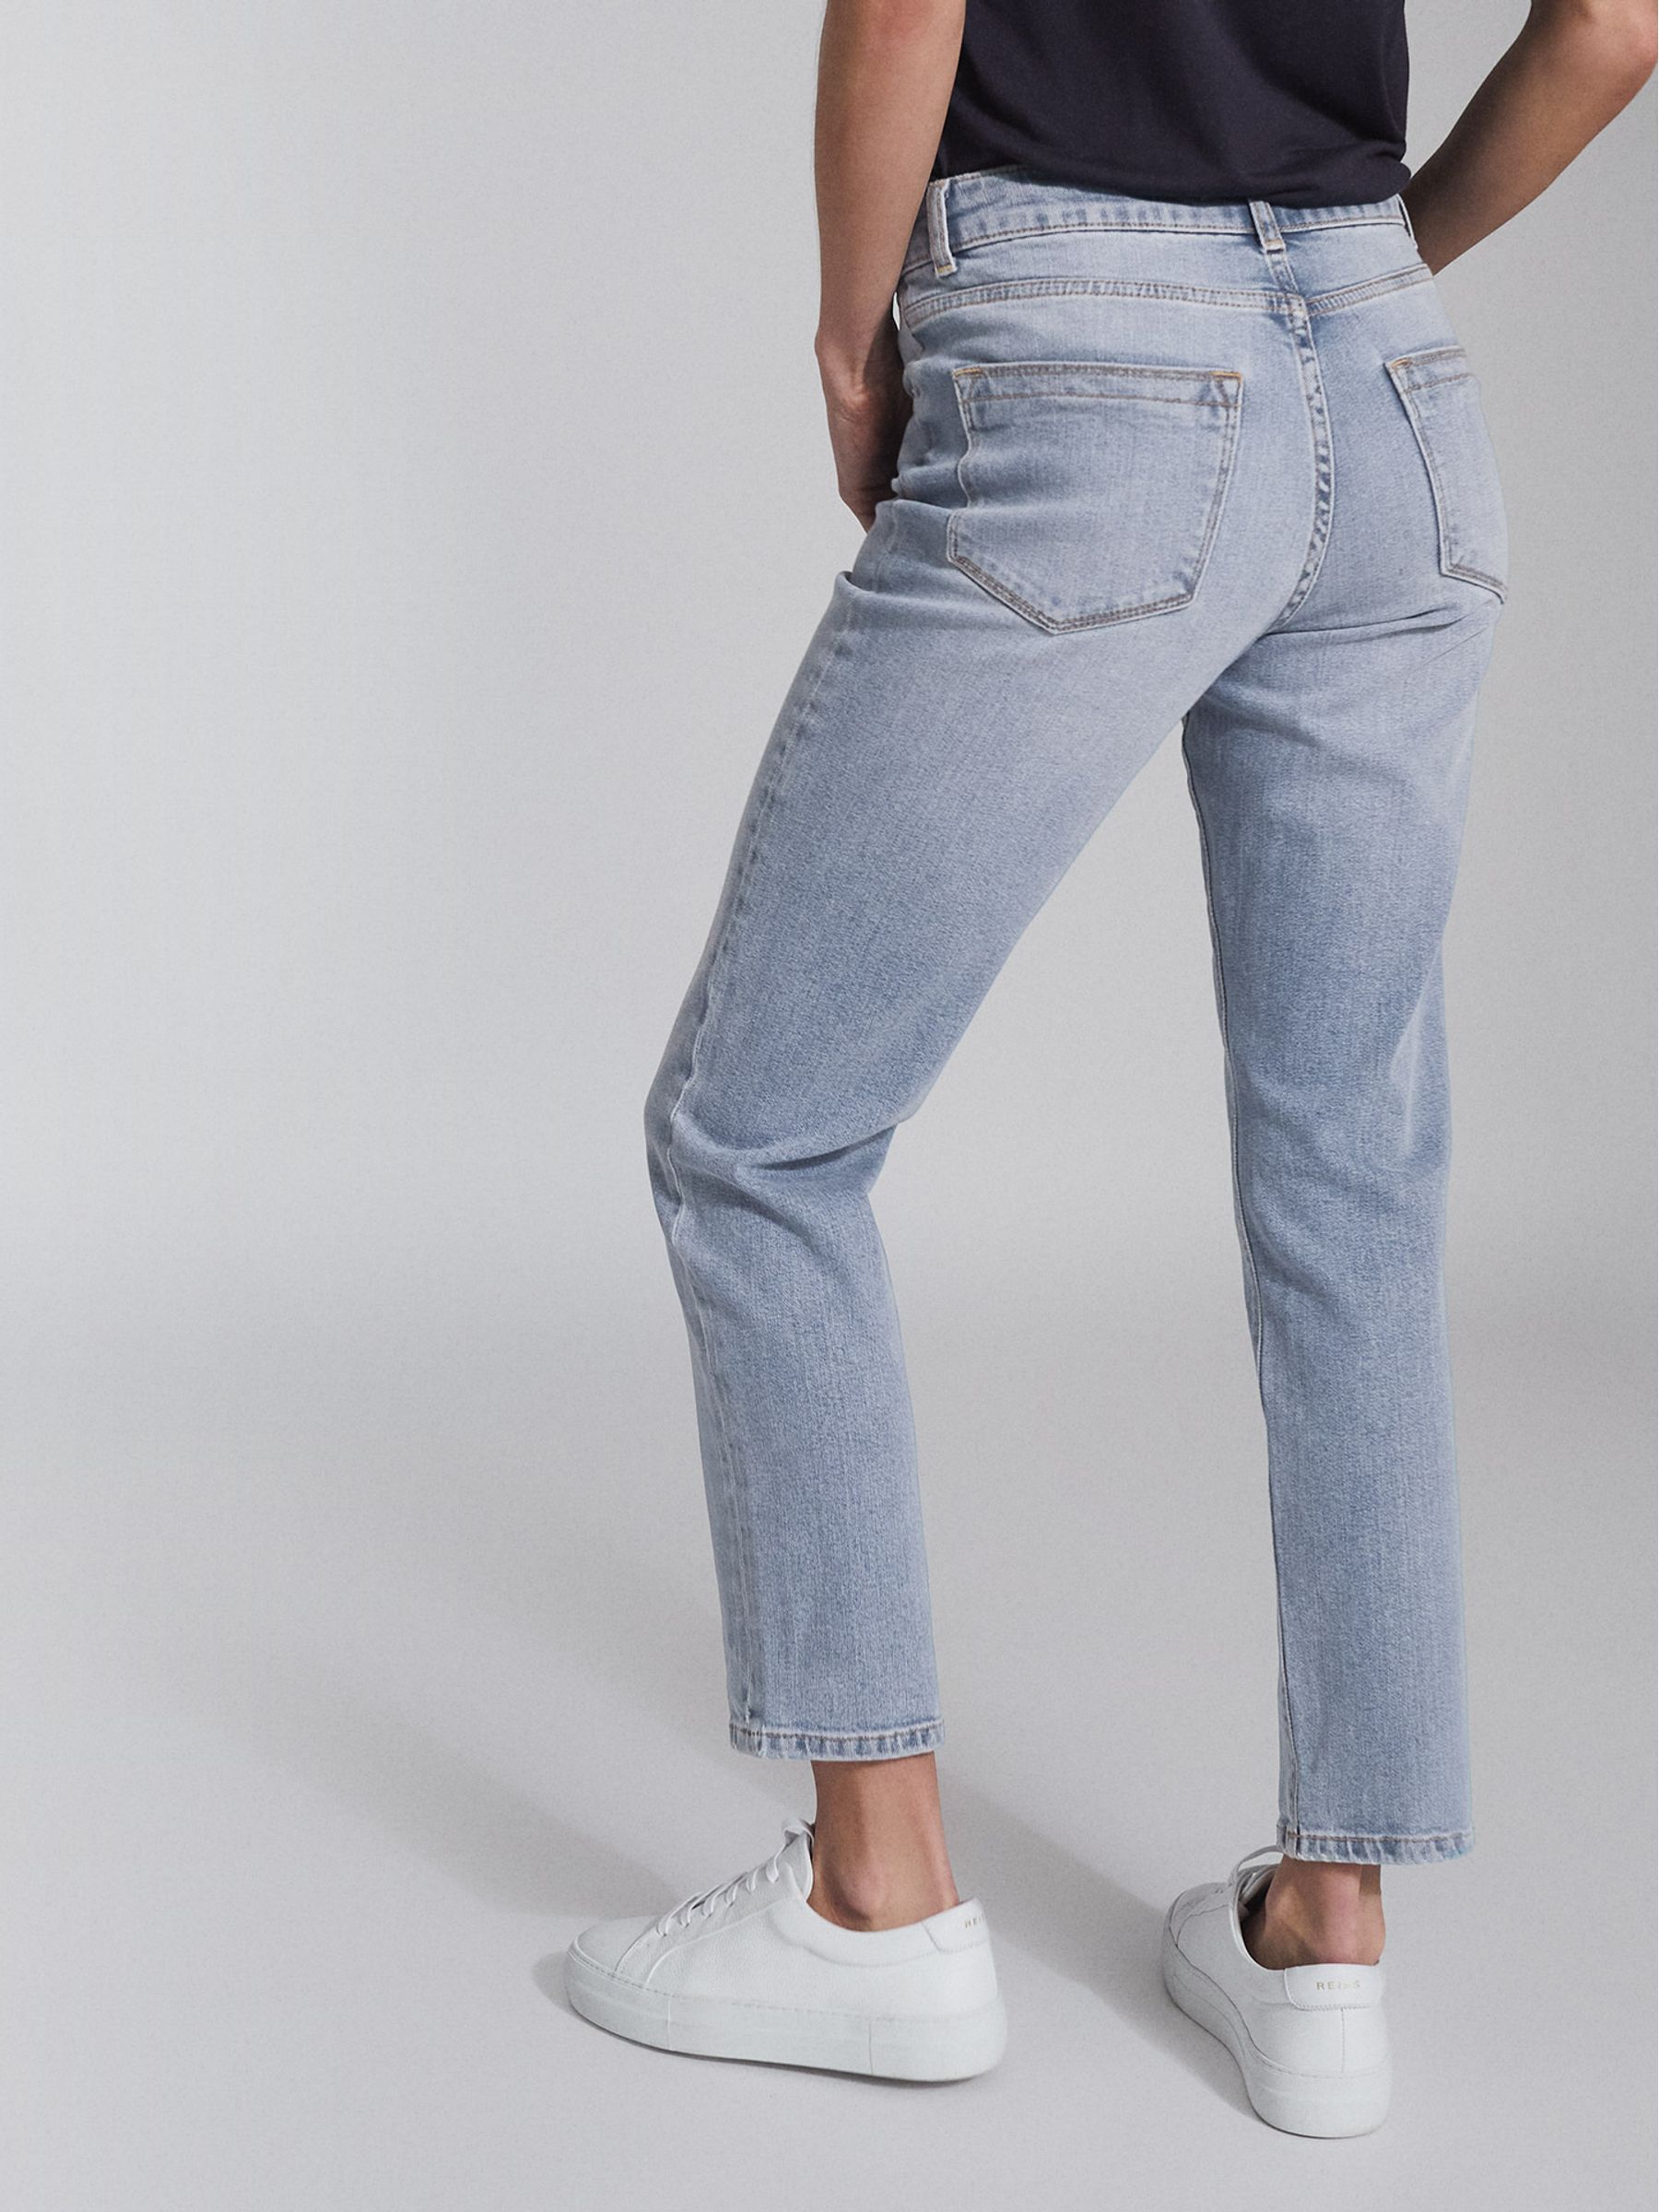 Reiss Bailey Mid Rise Slim Cropped Jeans - REISS